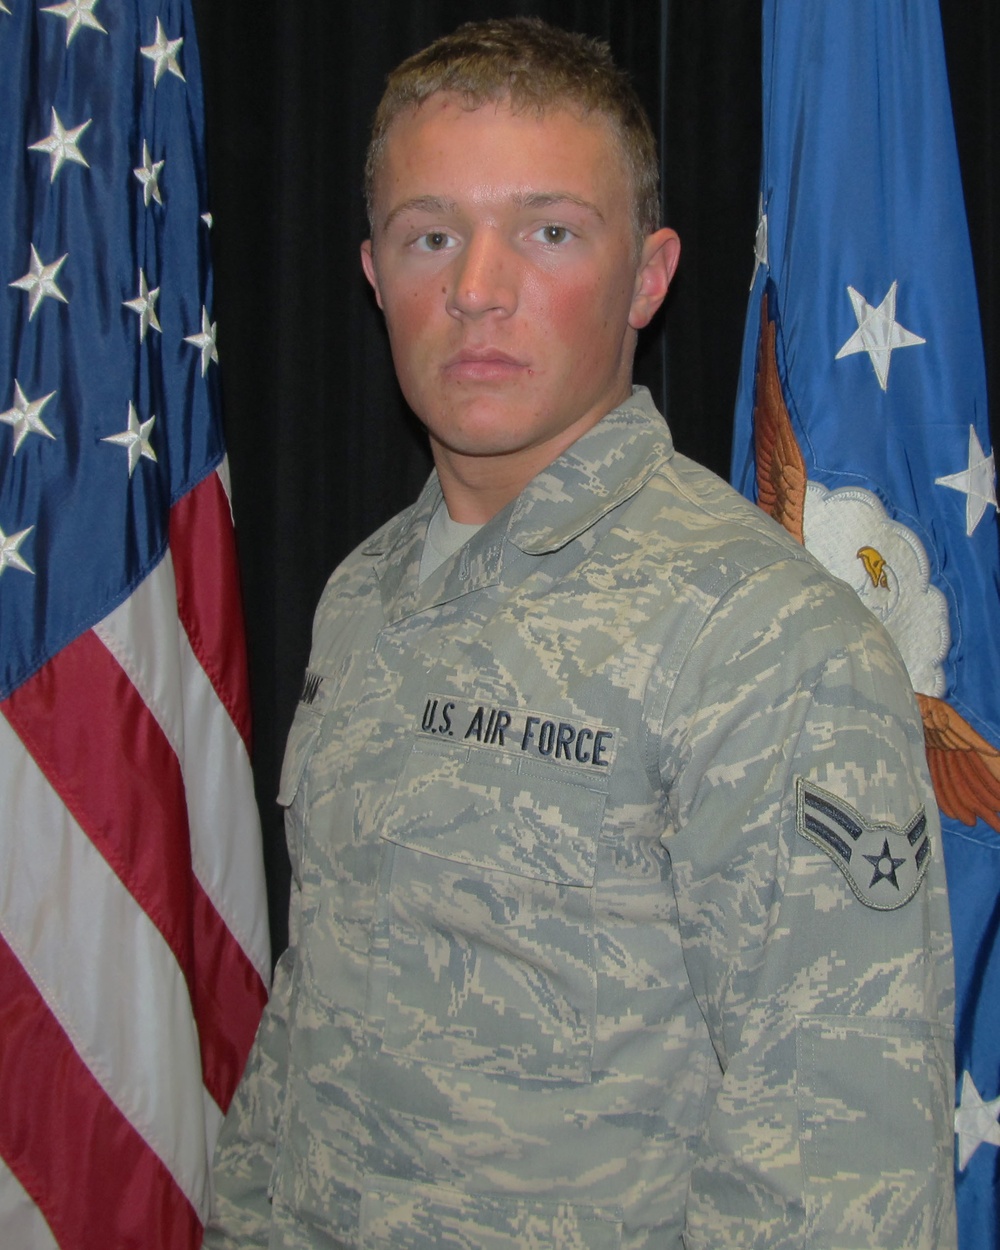 McConnell Airman saves 2 children from burning vehicle